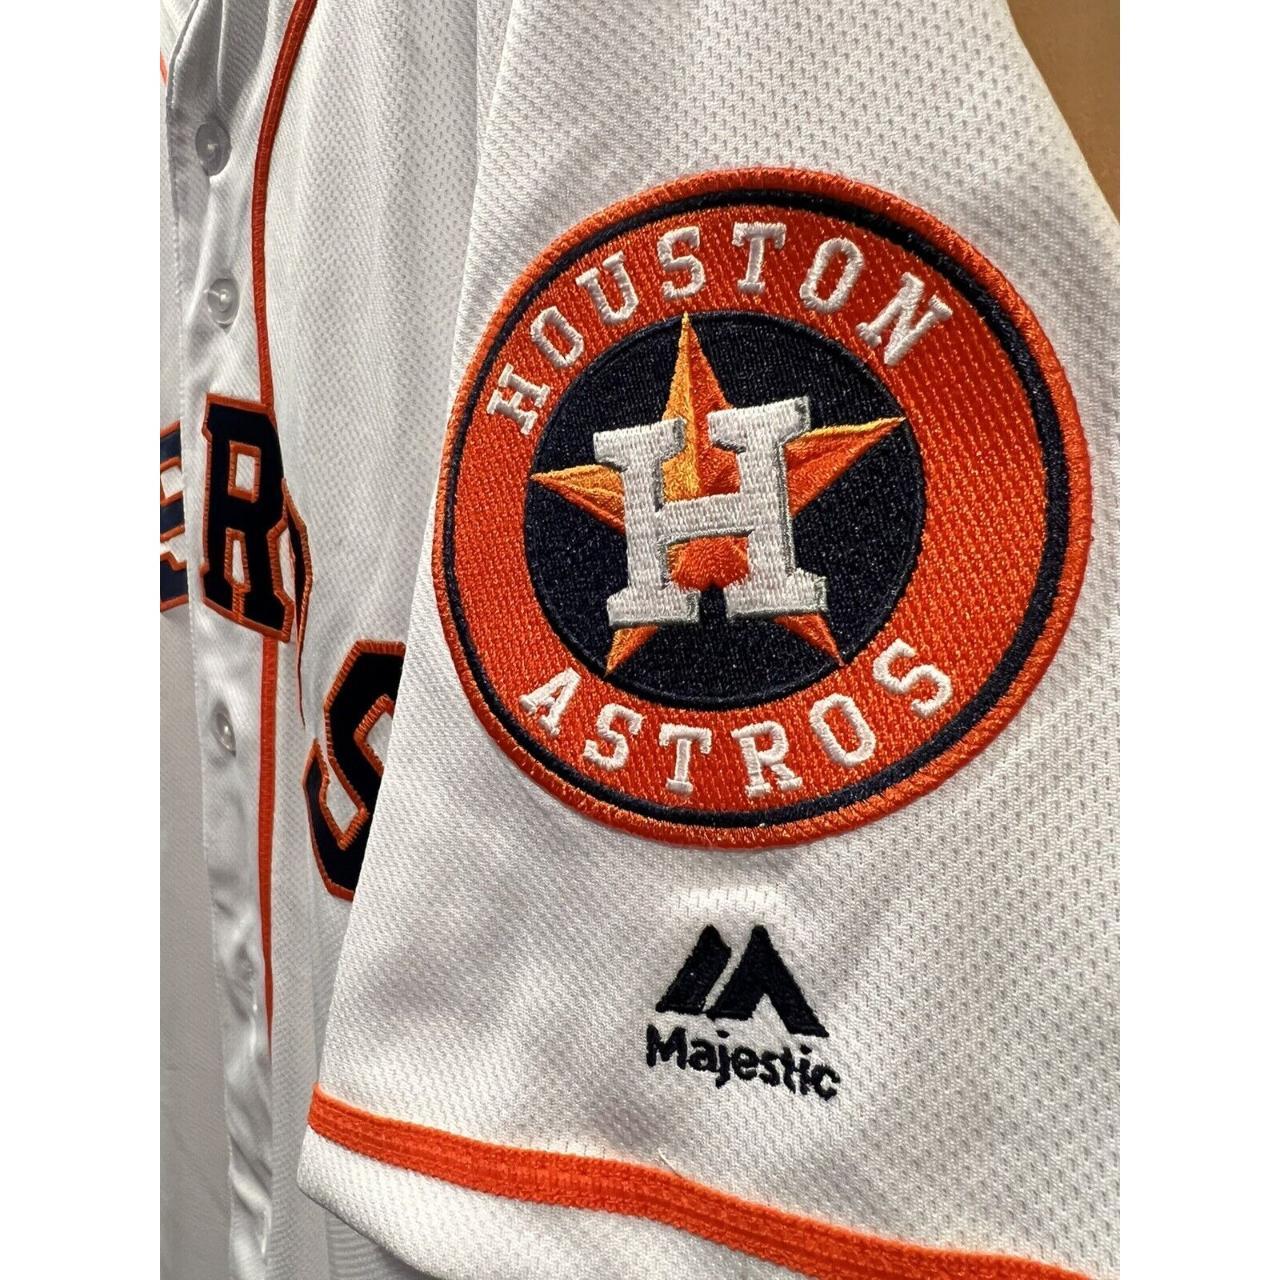 Mens MLB Houston Astros Authentic On Field Flex Base Jersey - Home White